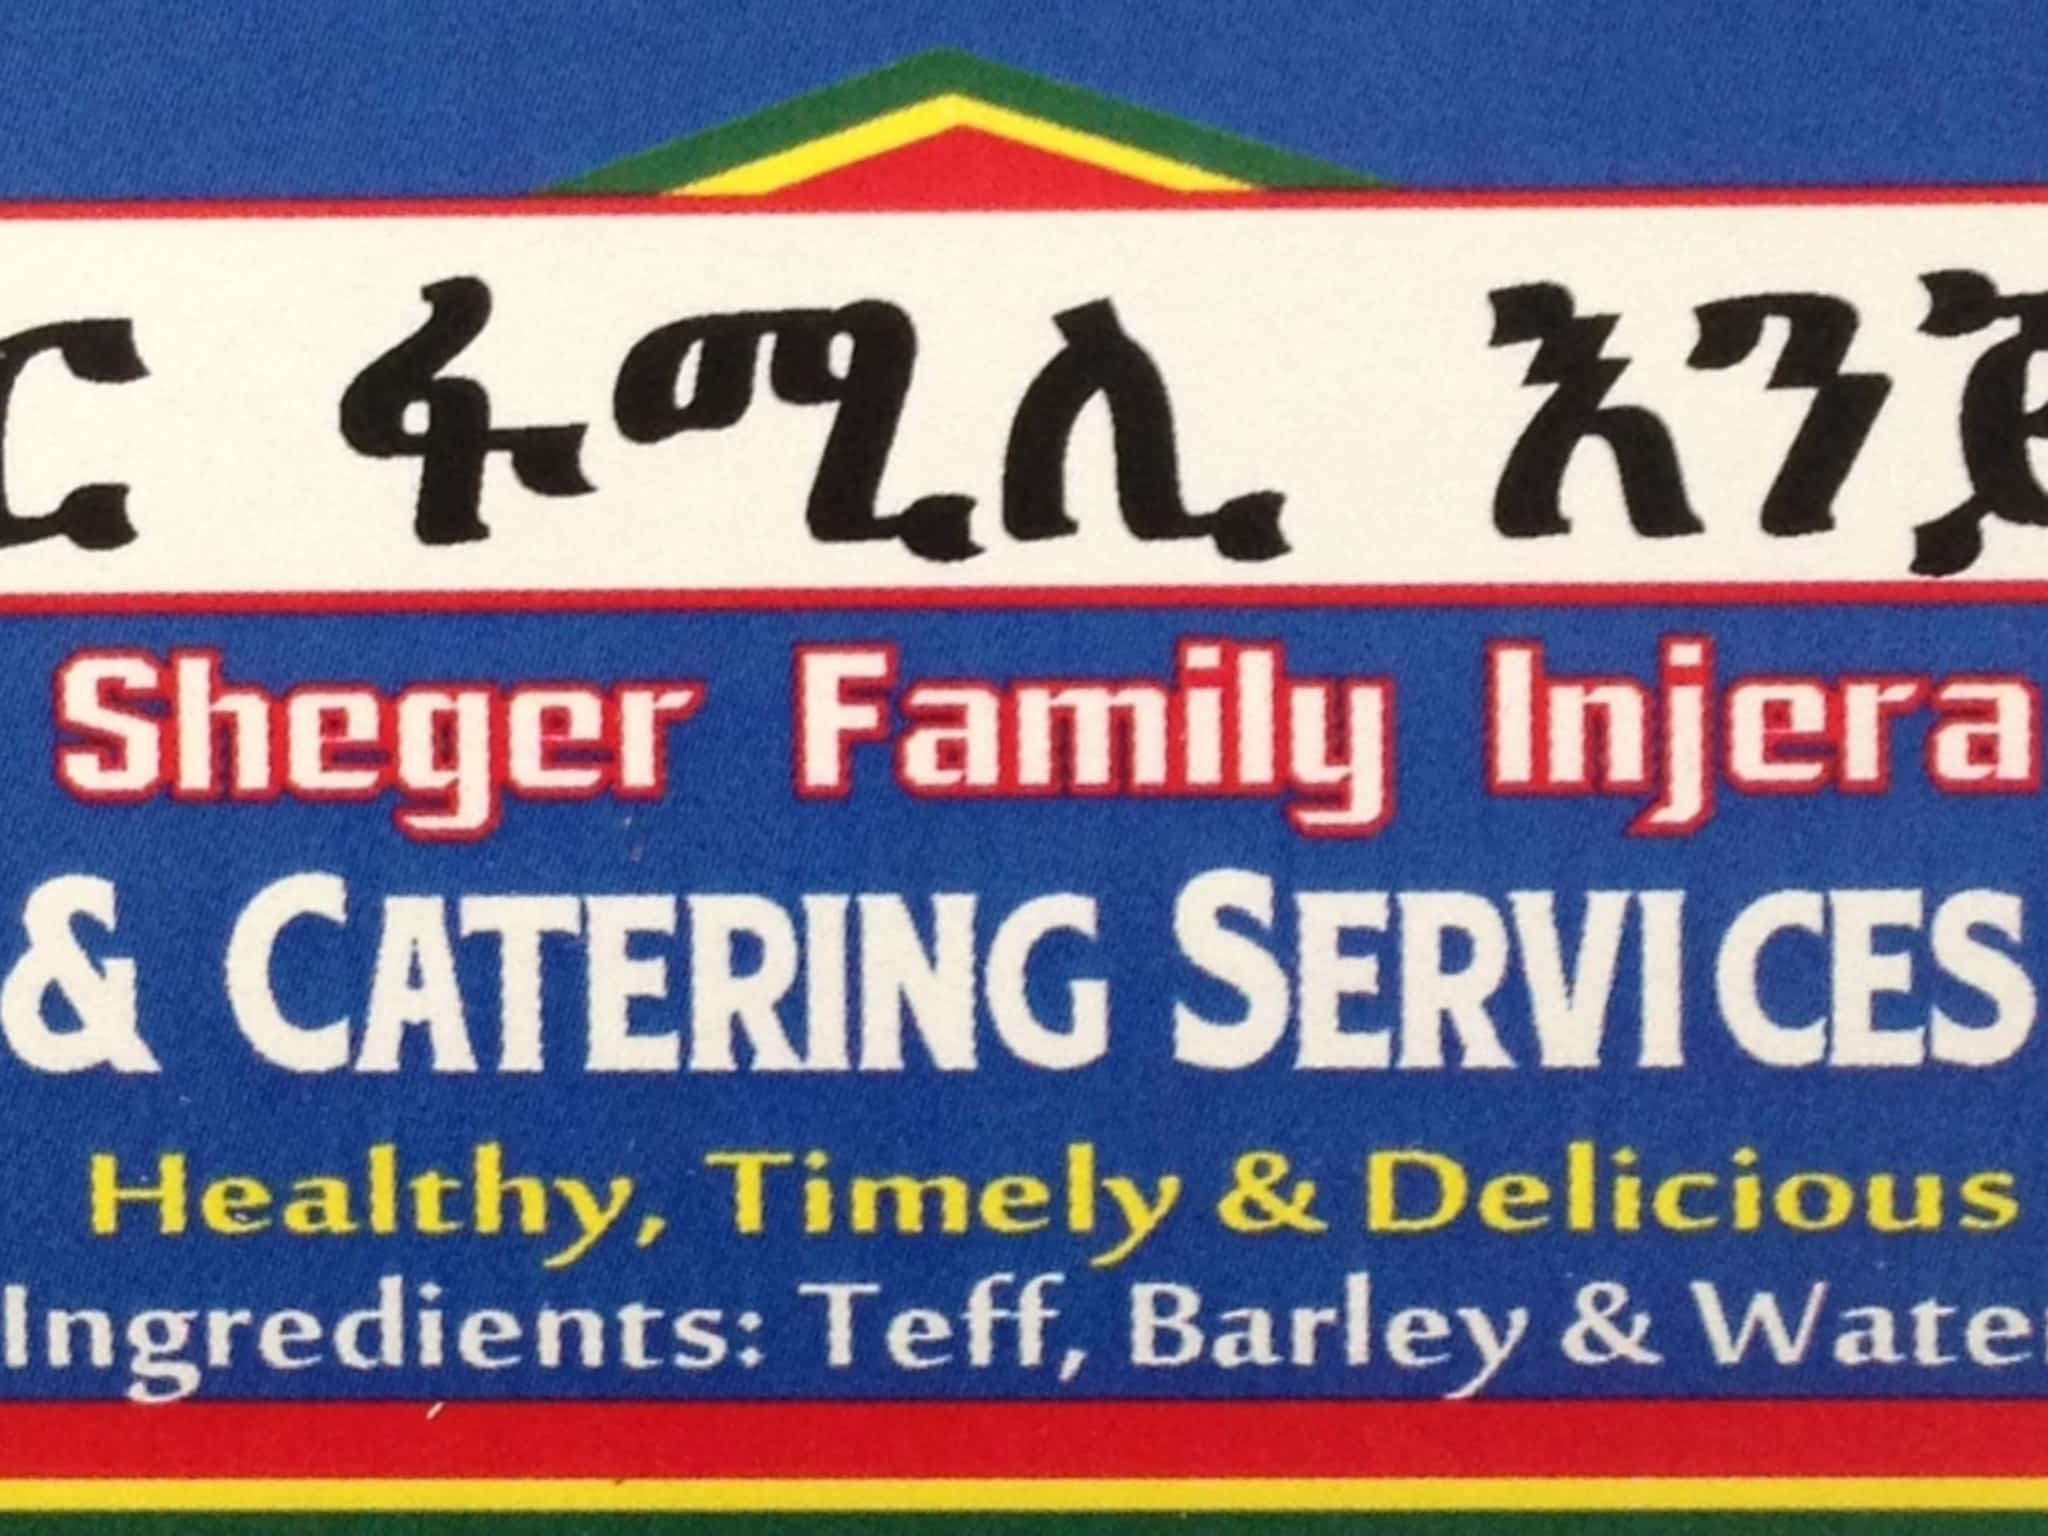 photo Sheger Family Injera & Catering Services